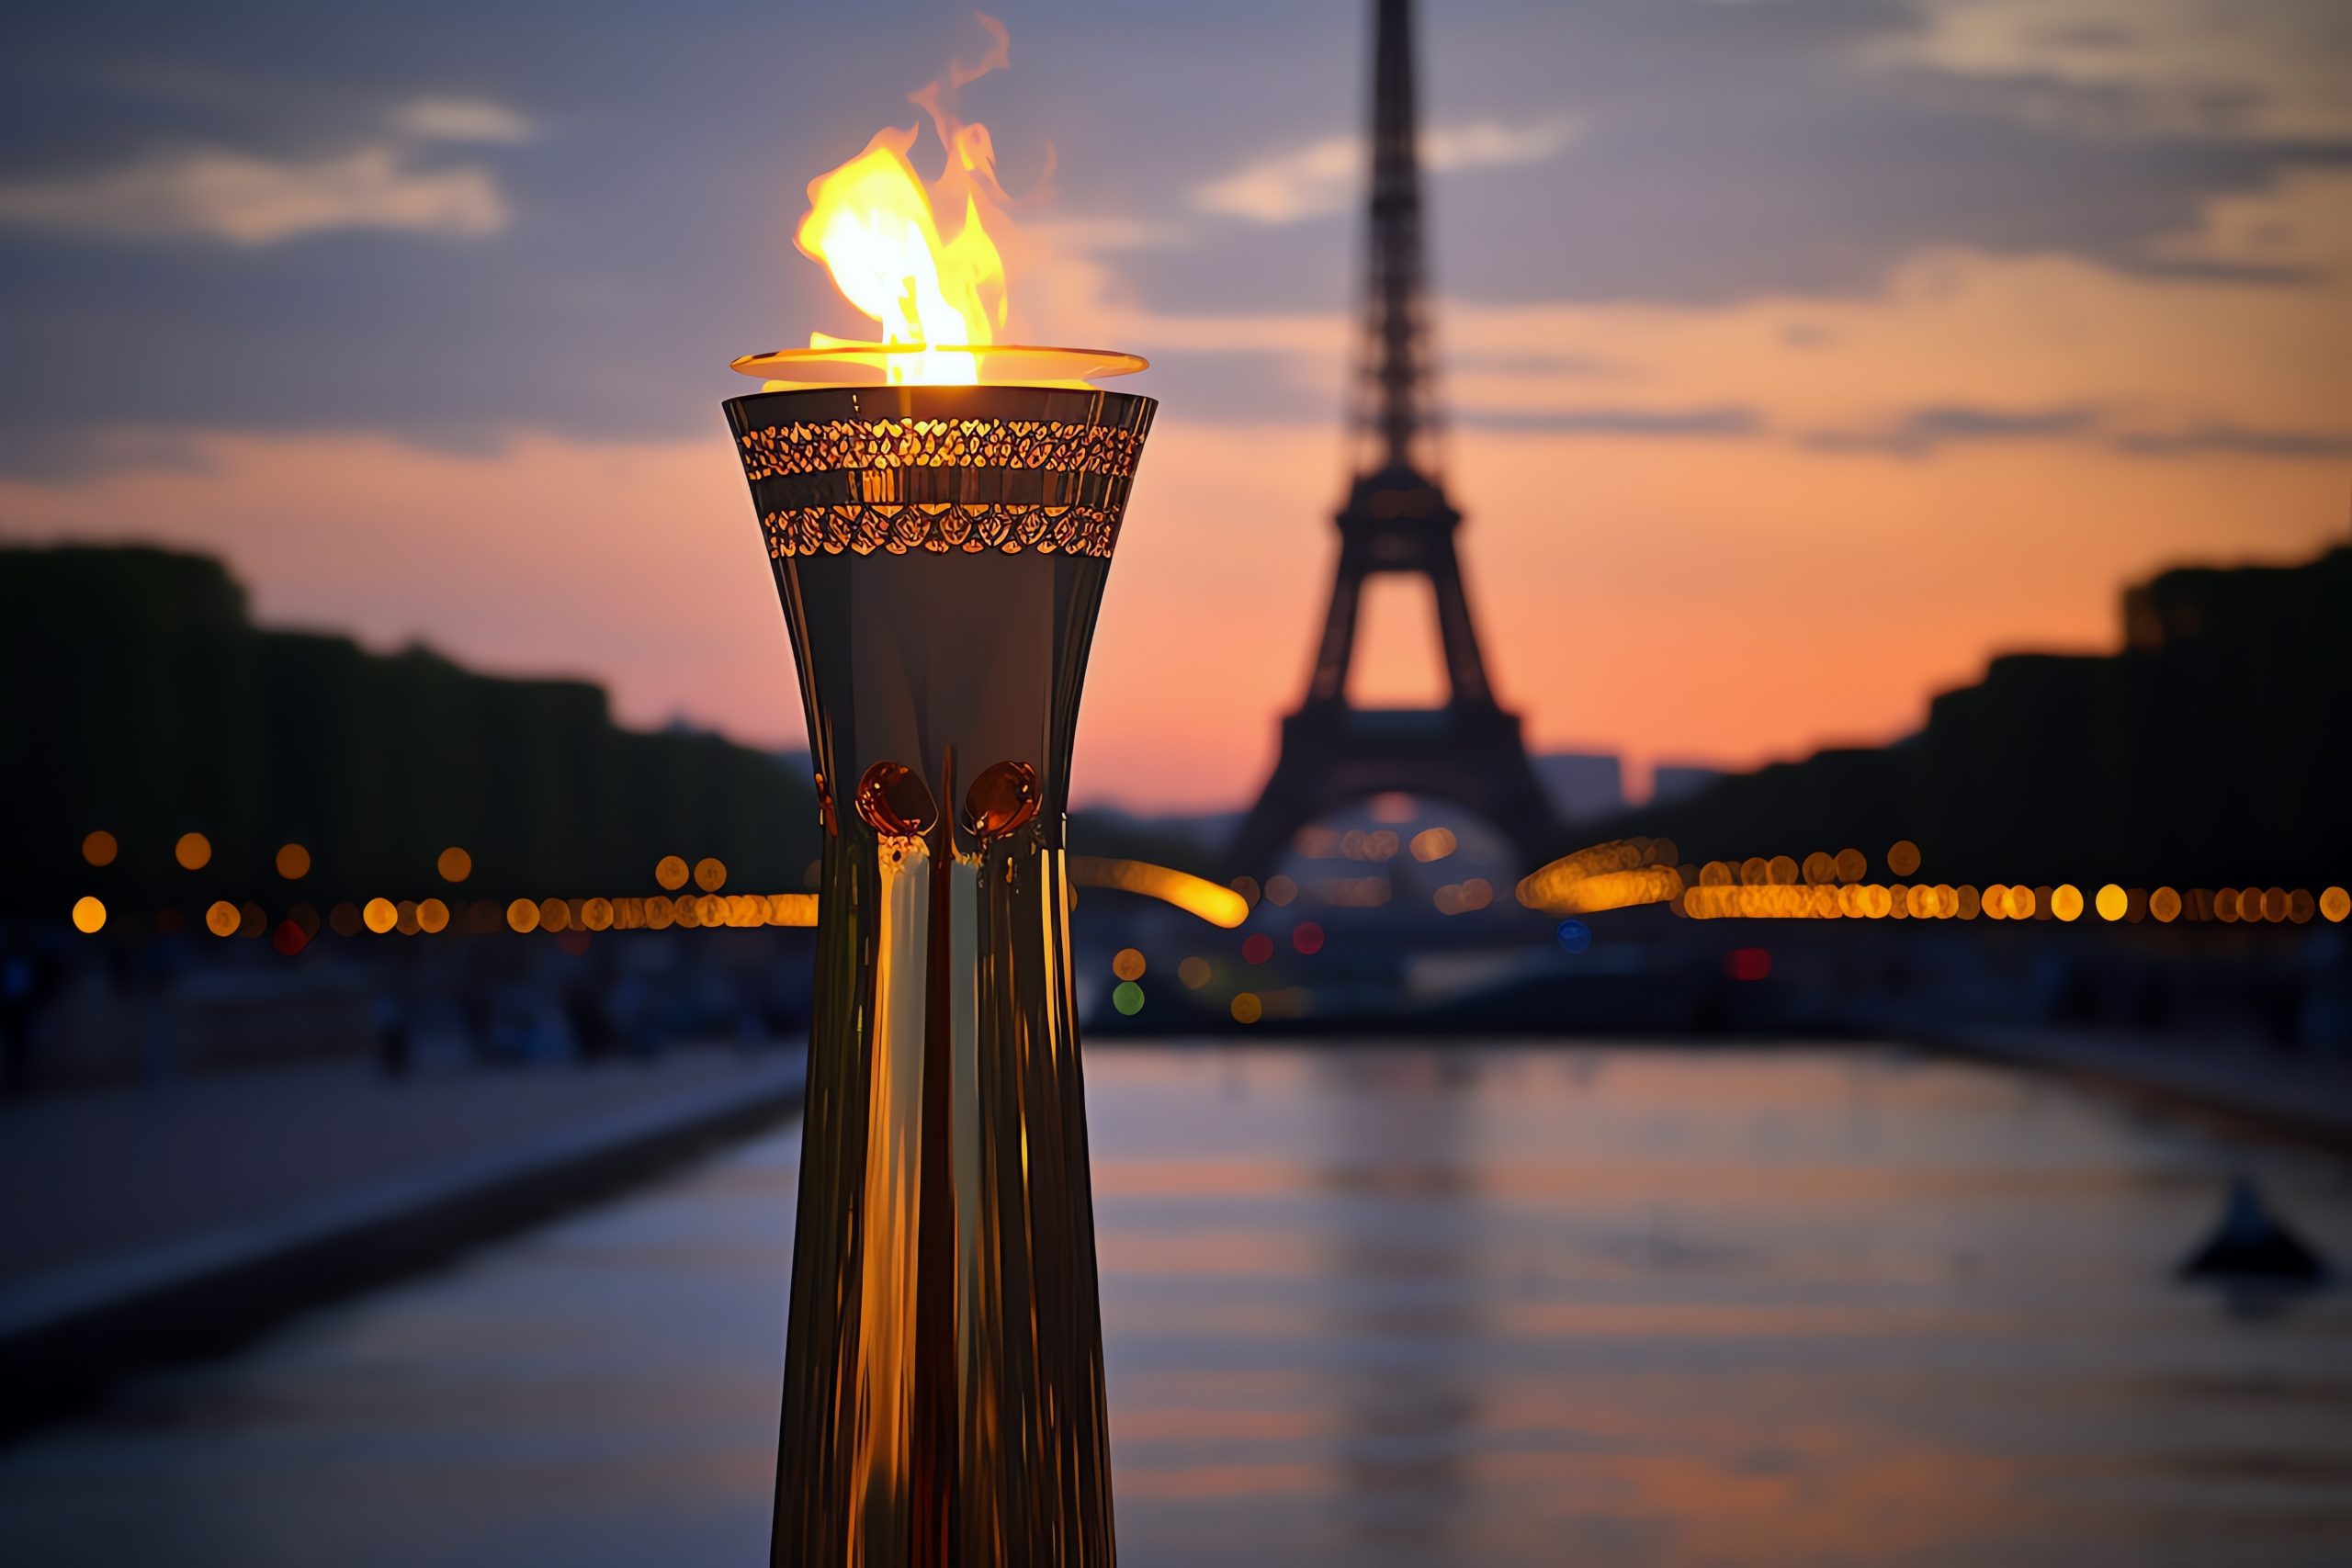 The flaming Olympic Torch in front of the Eiffel Towers ahead of the 2024 Paris Olympic Games